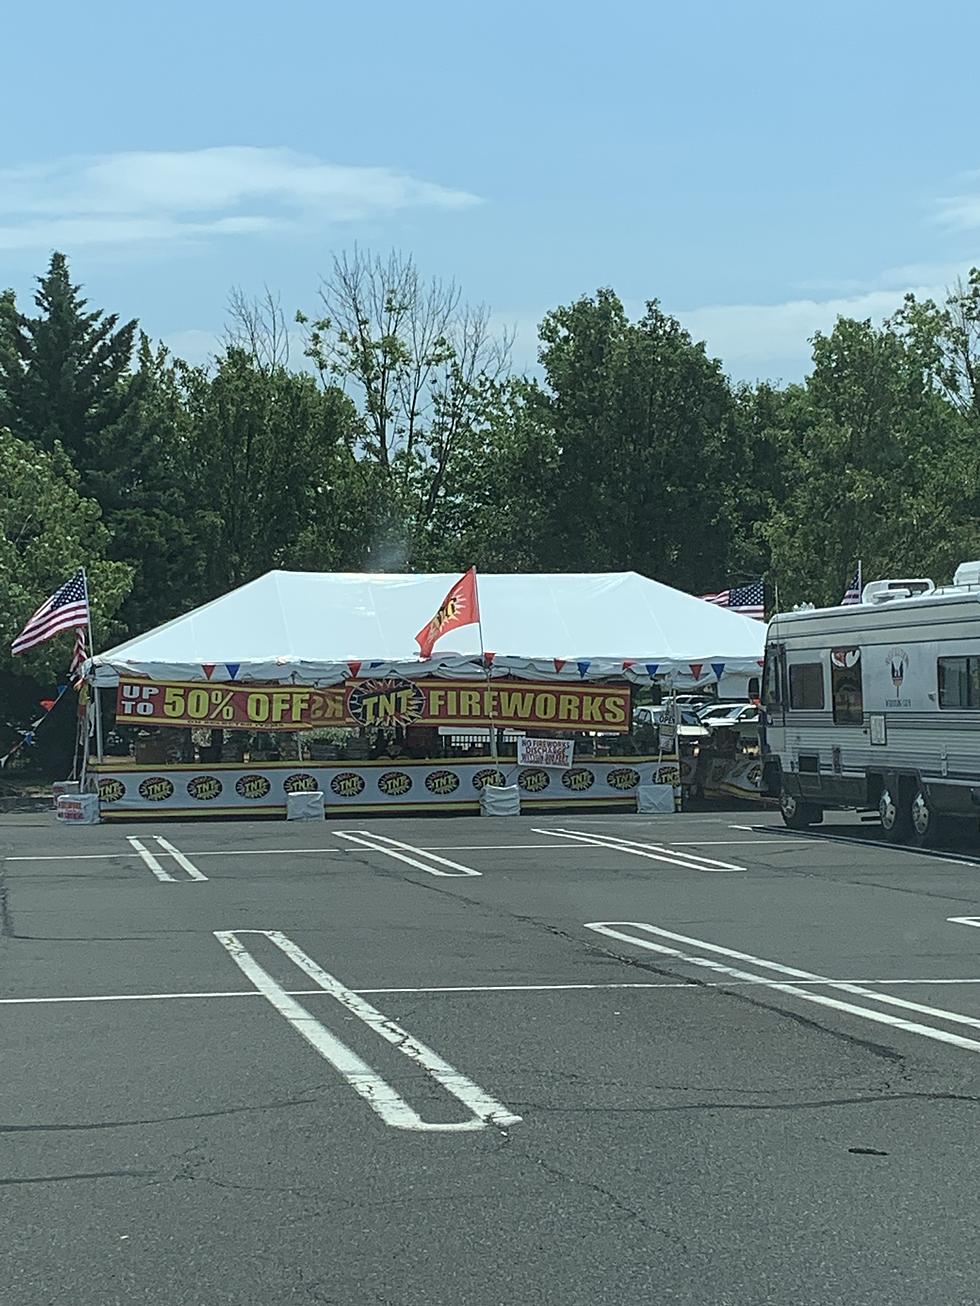 The Local Pop Up Tents Selling Fireworks Are Legit